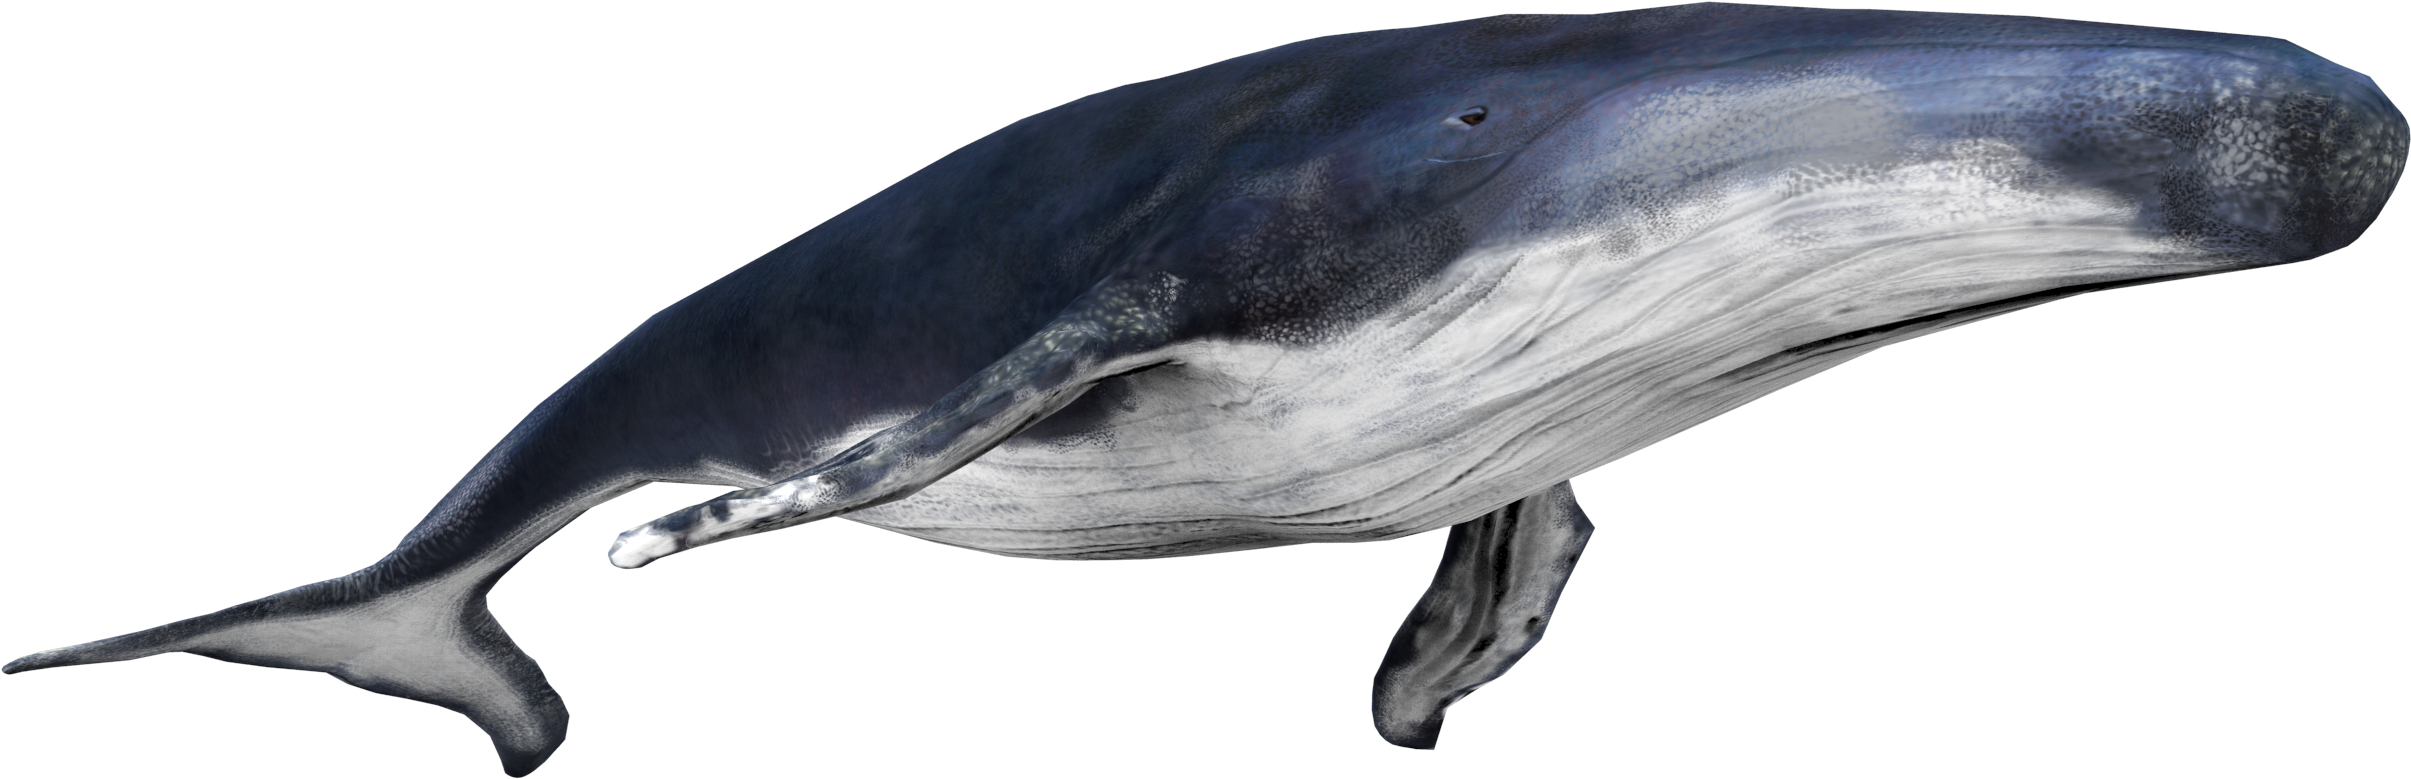 Blue Whale Side View.png PNG